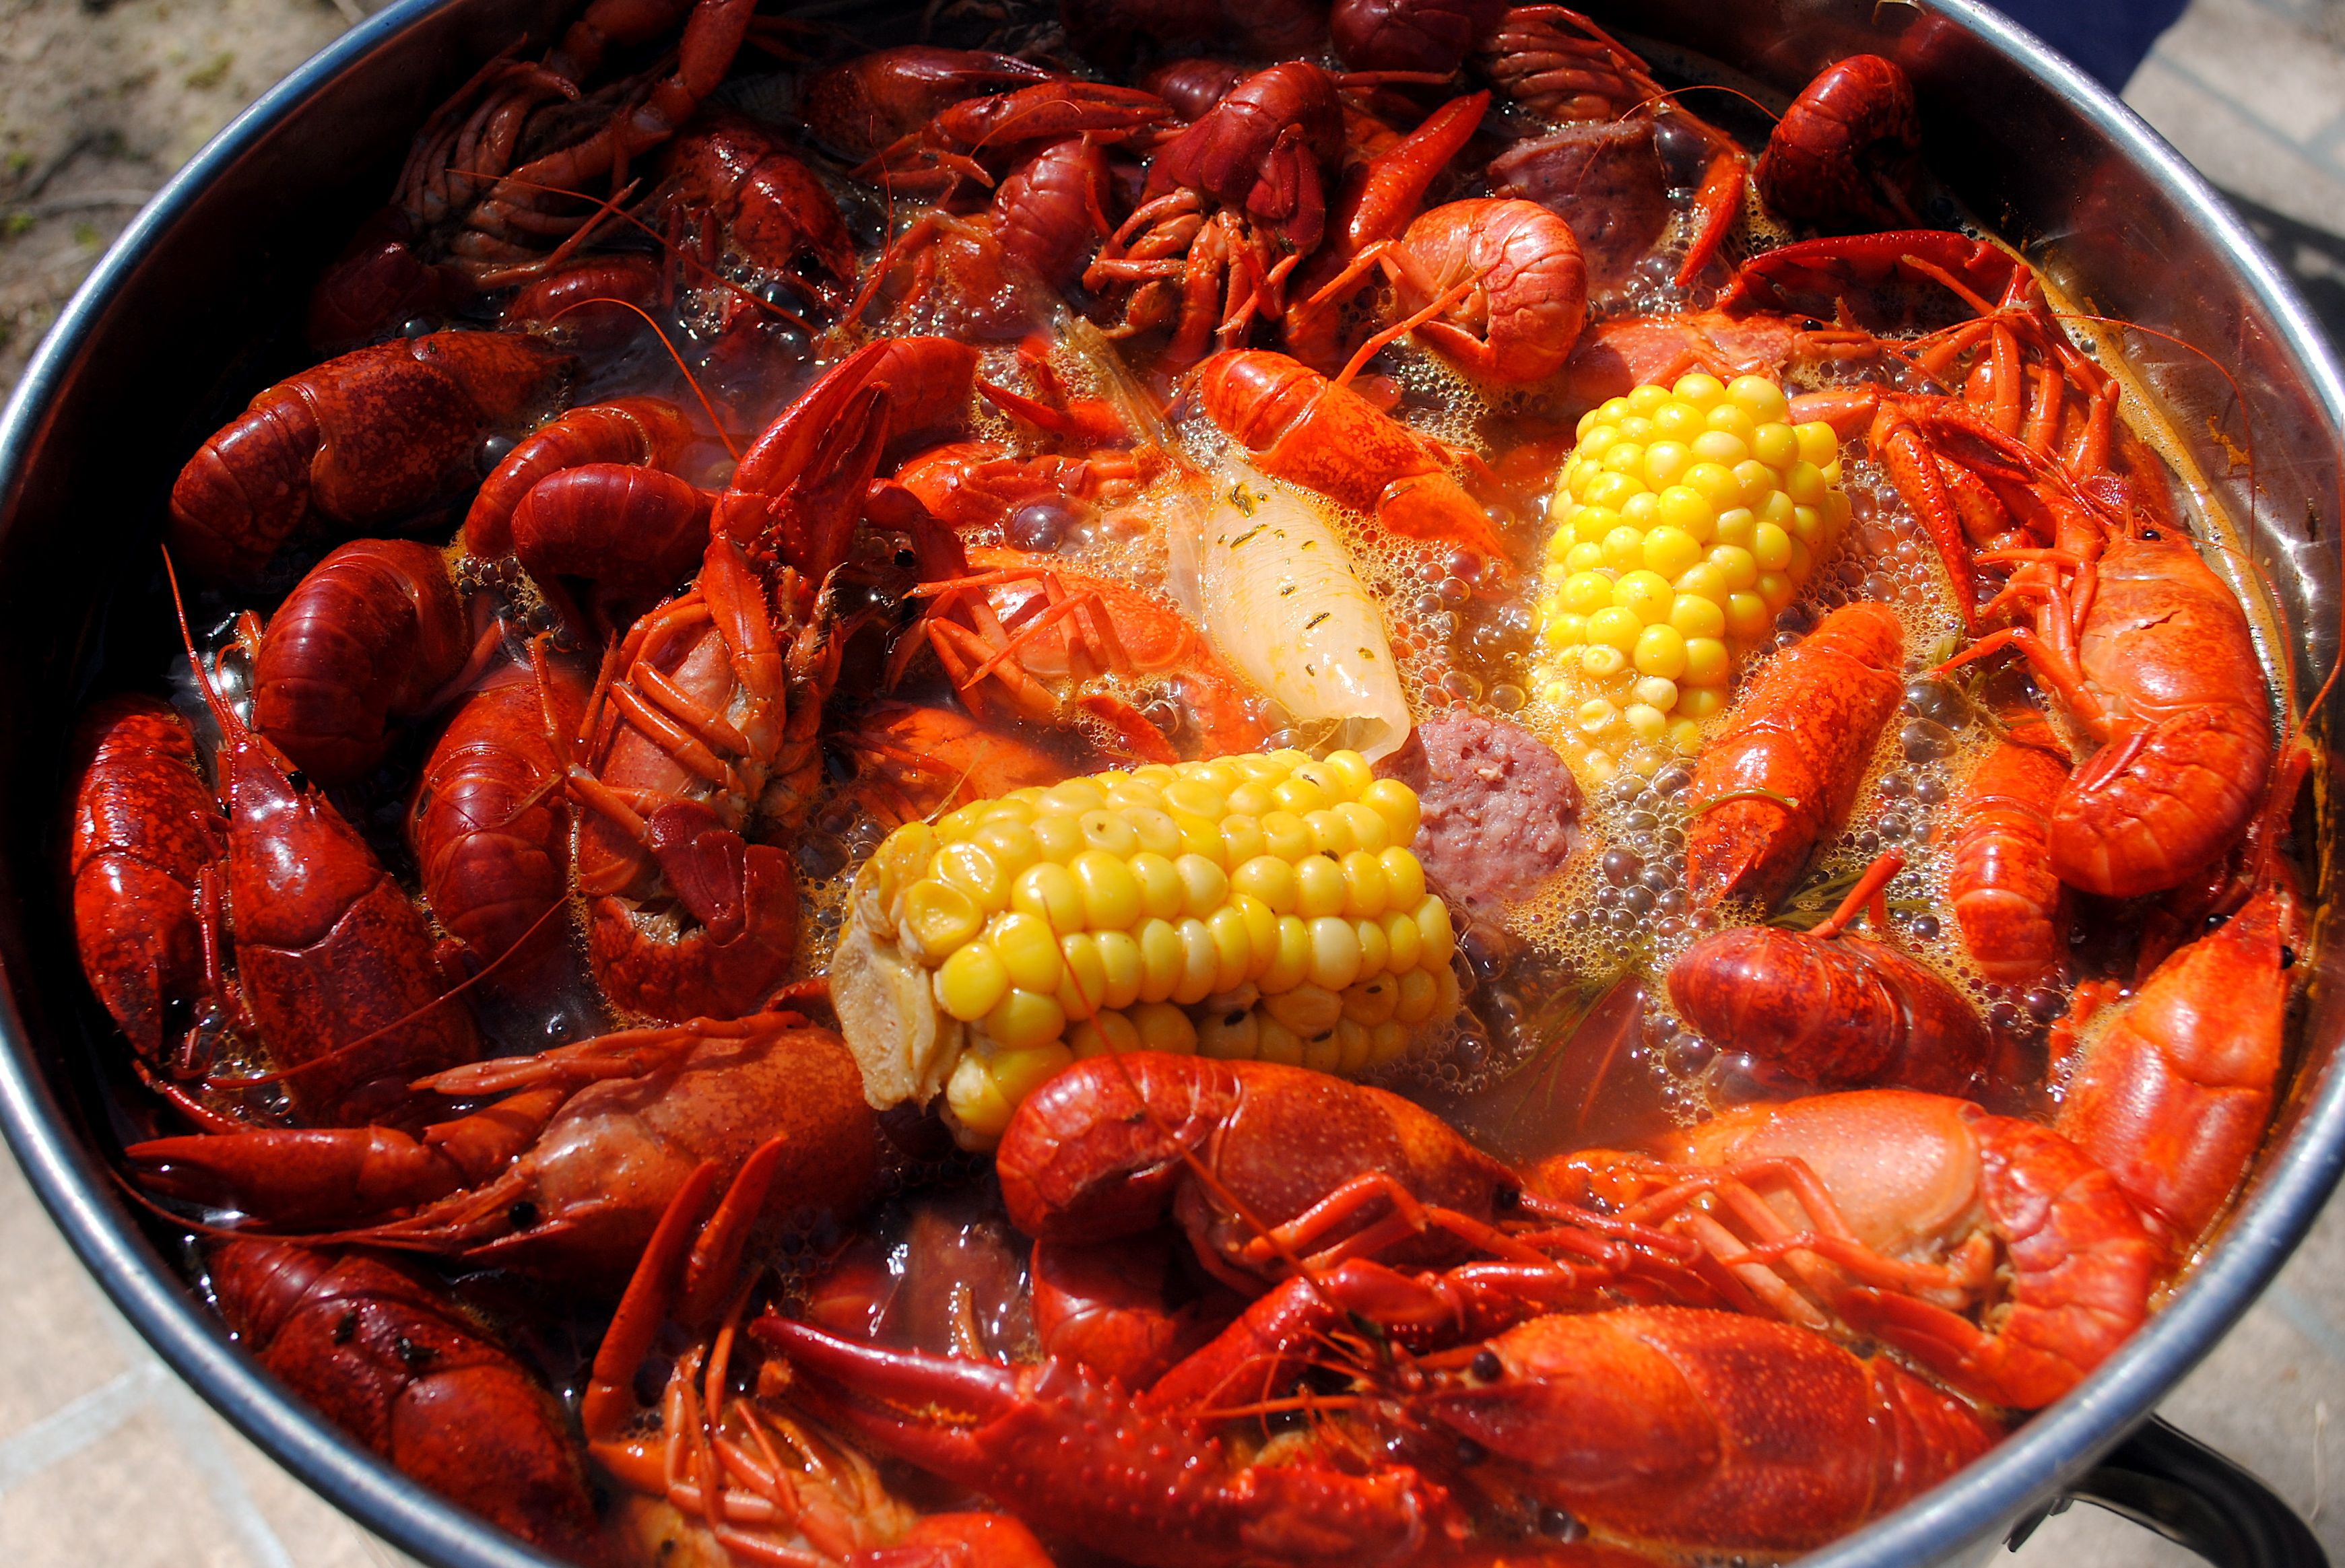 You can download latest photo gallery of Crawfish Boil